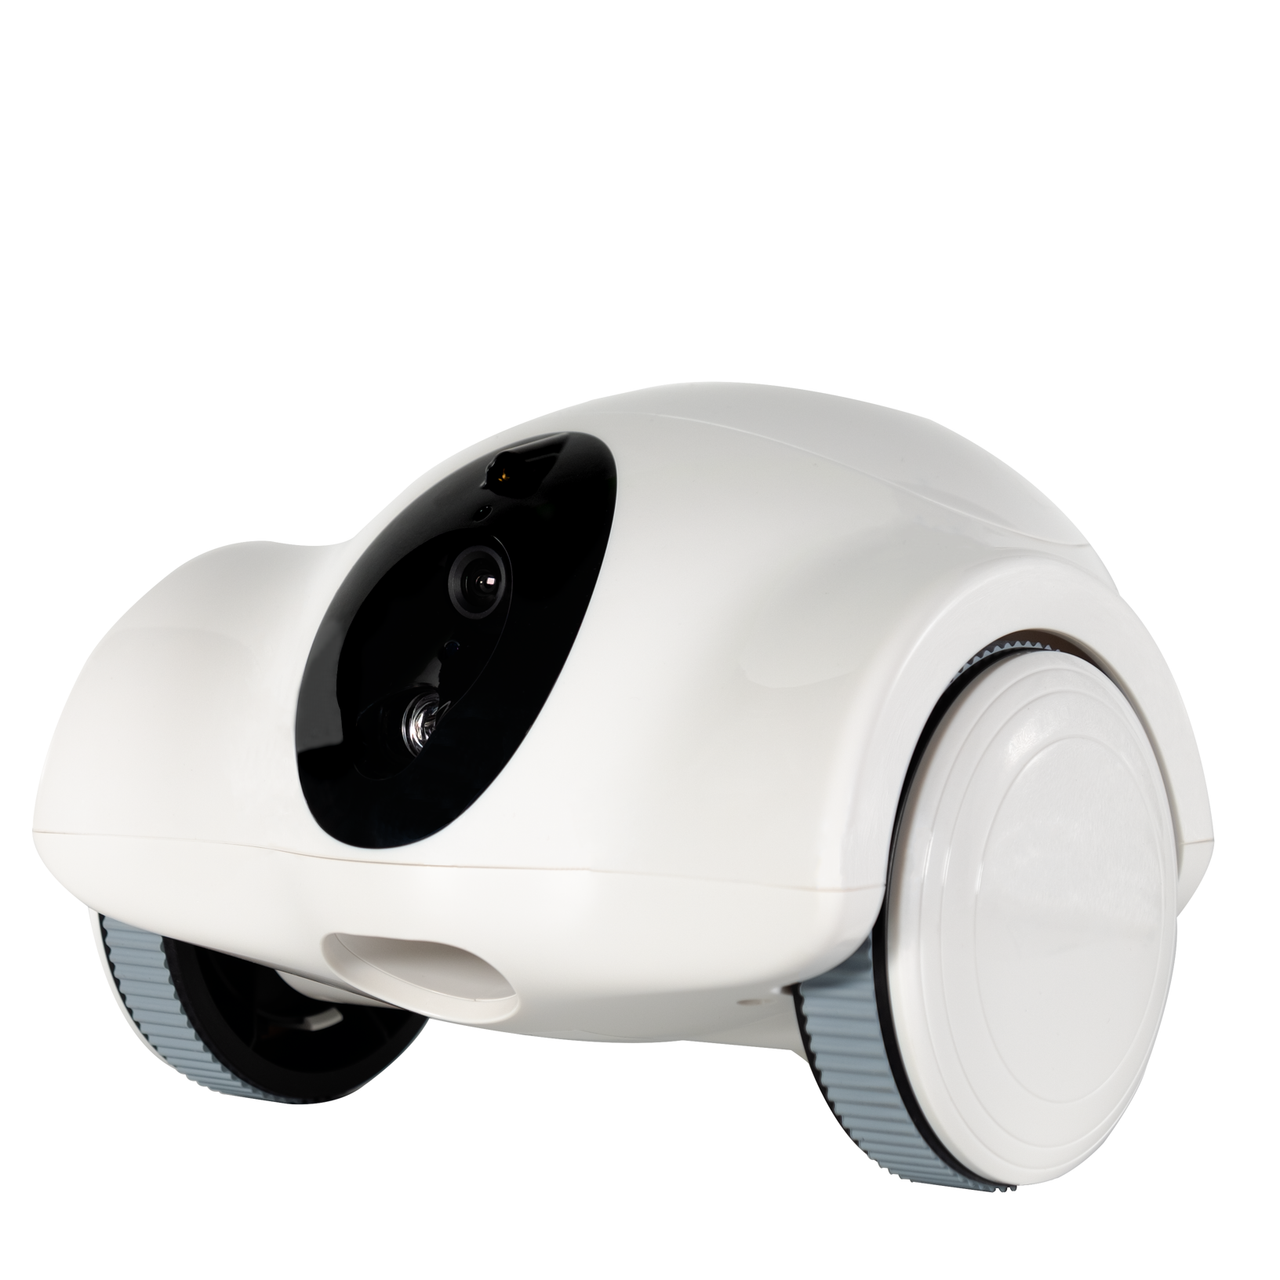 Moving Pet Robot with Camera, Feeding and Playing